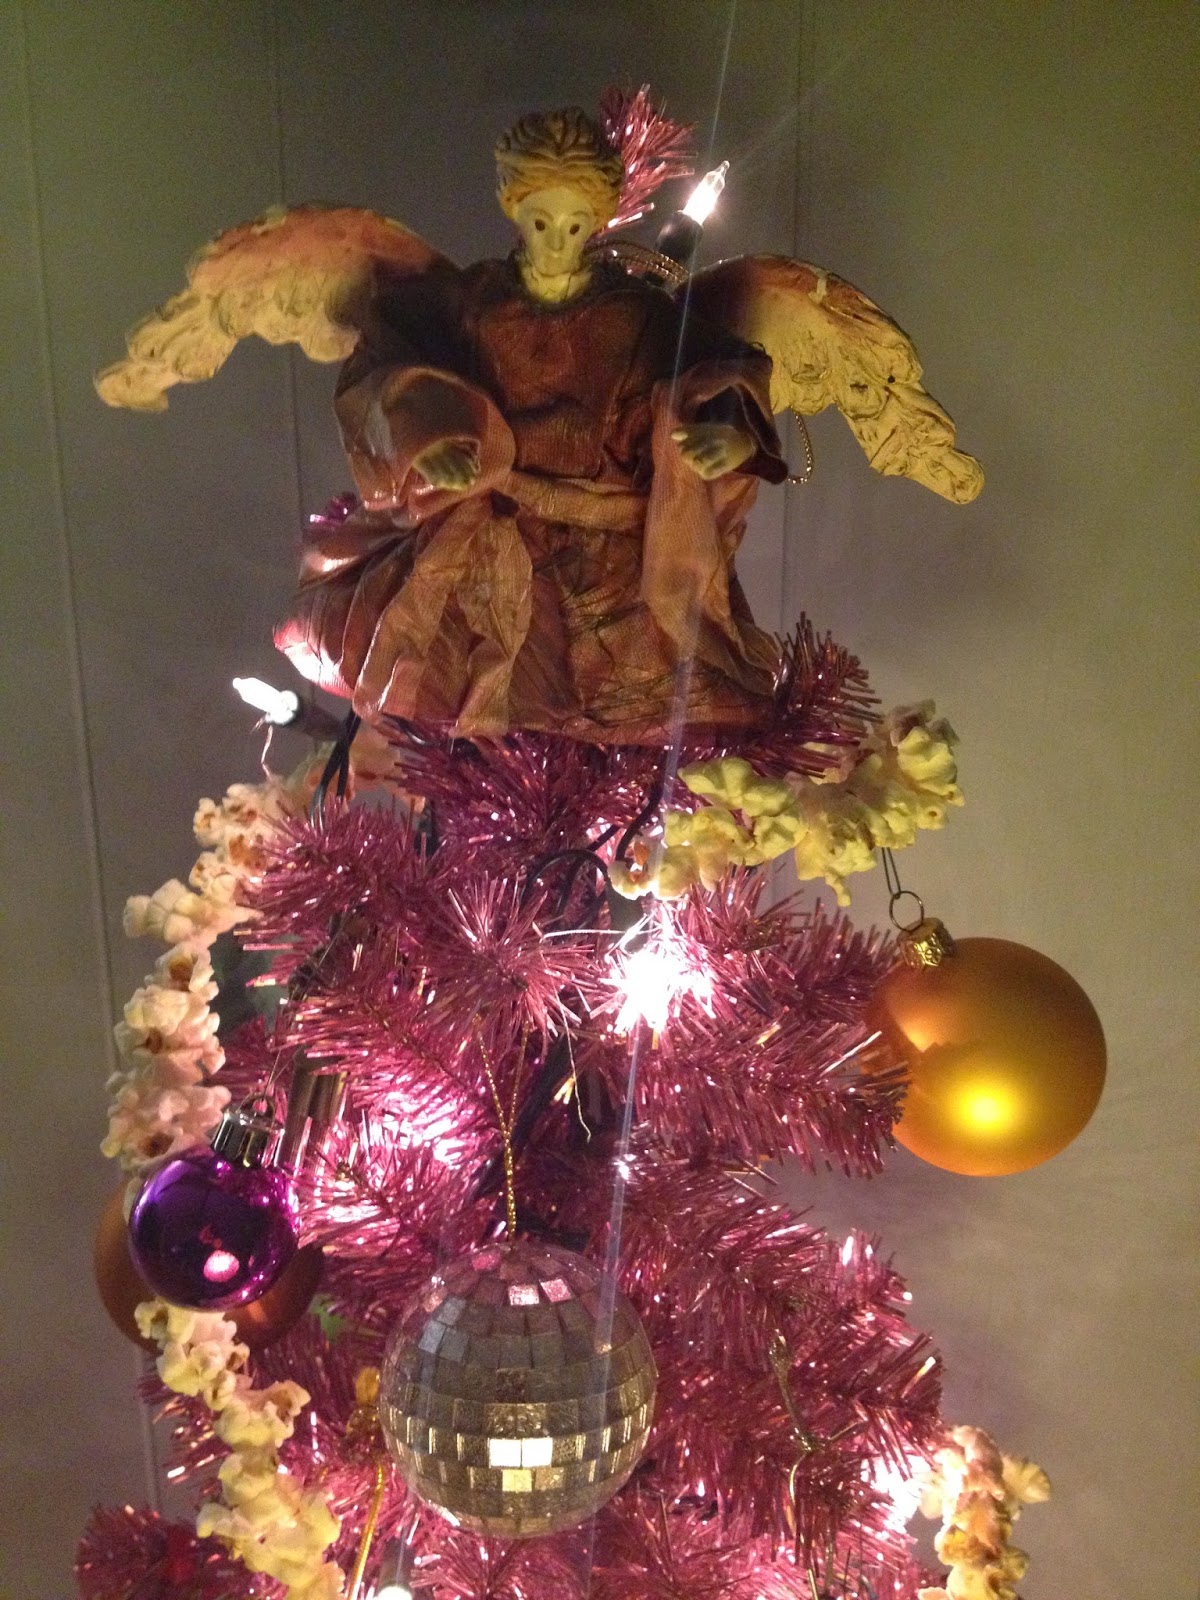 Angel at the top of the tree